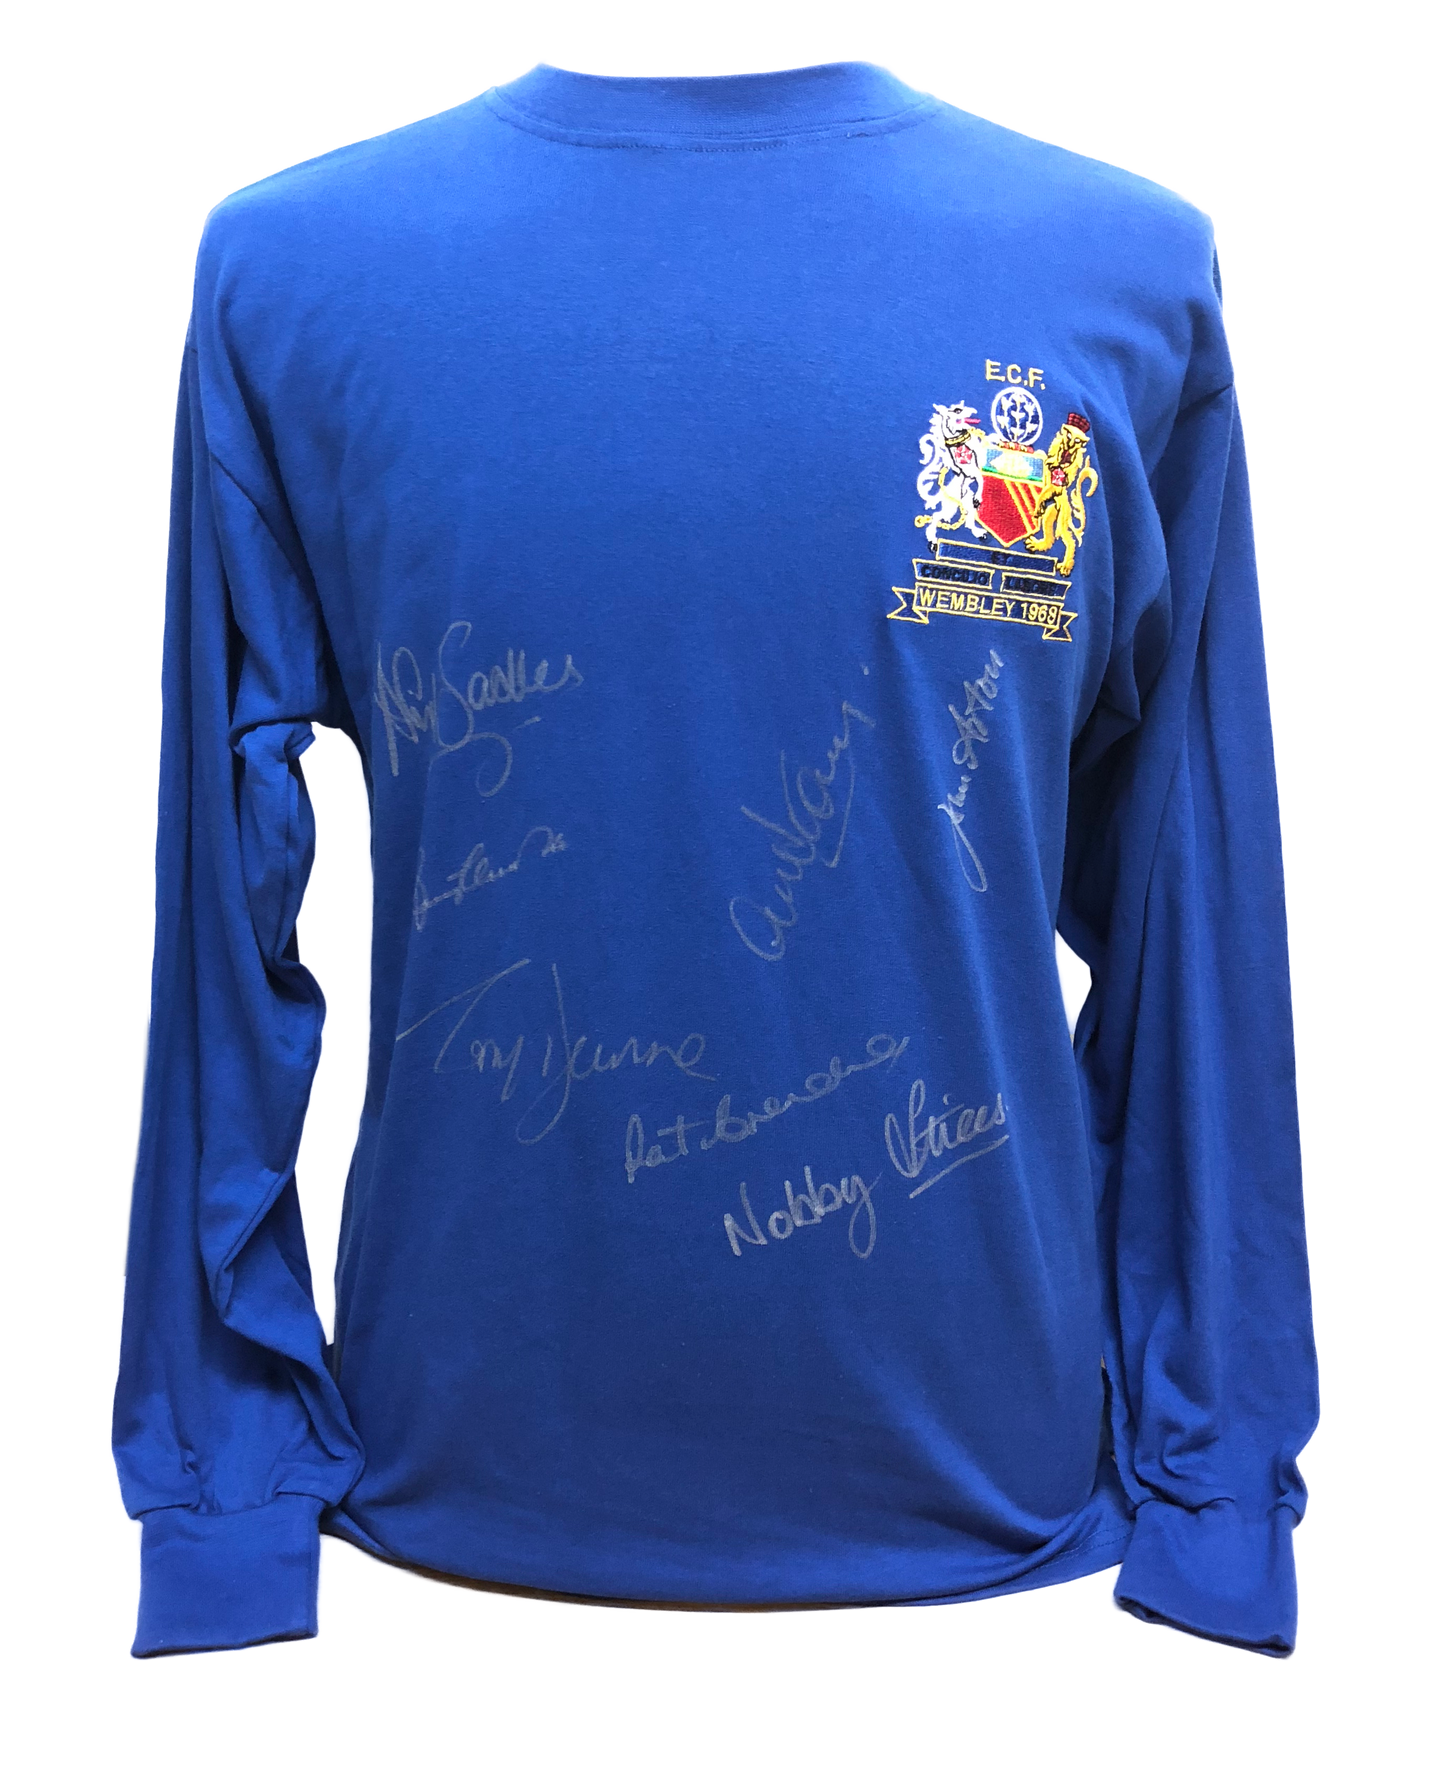 Manchester United 1968 European Cup Winners Shirt Signed by 7